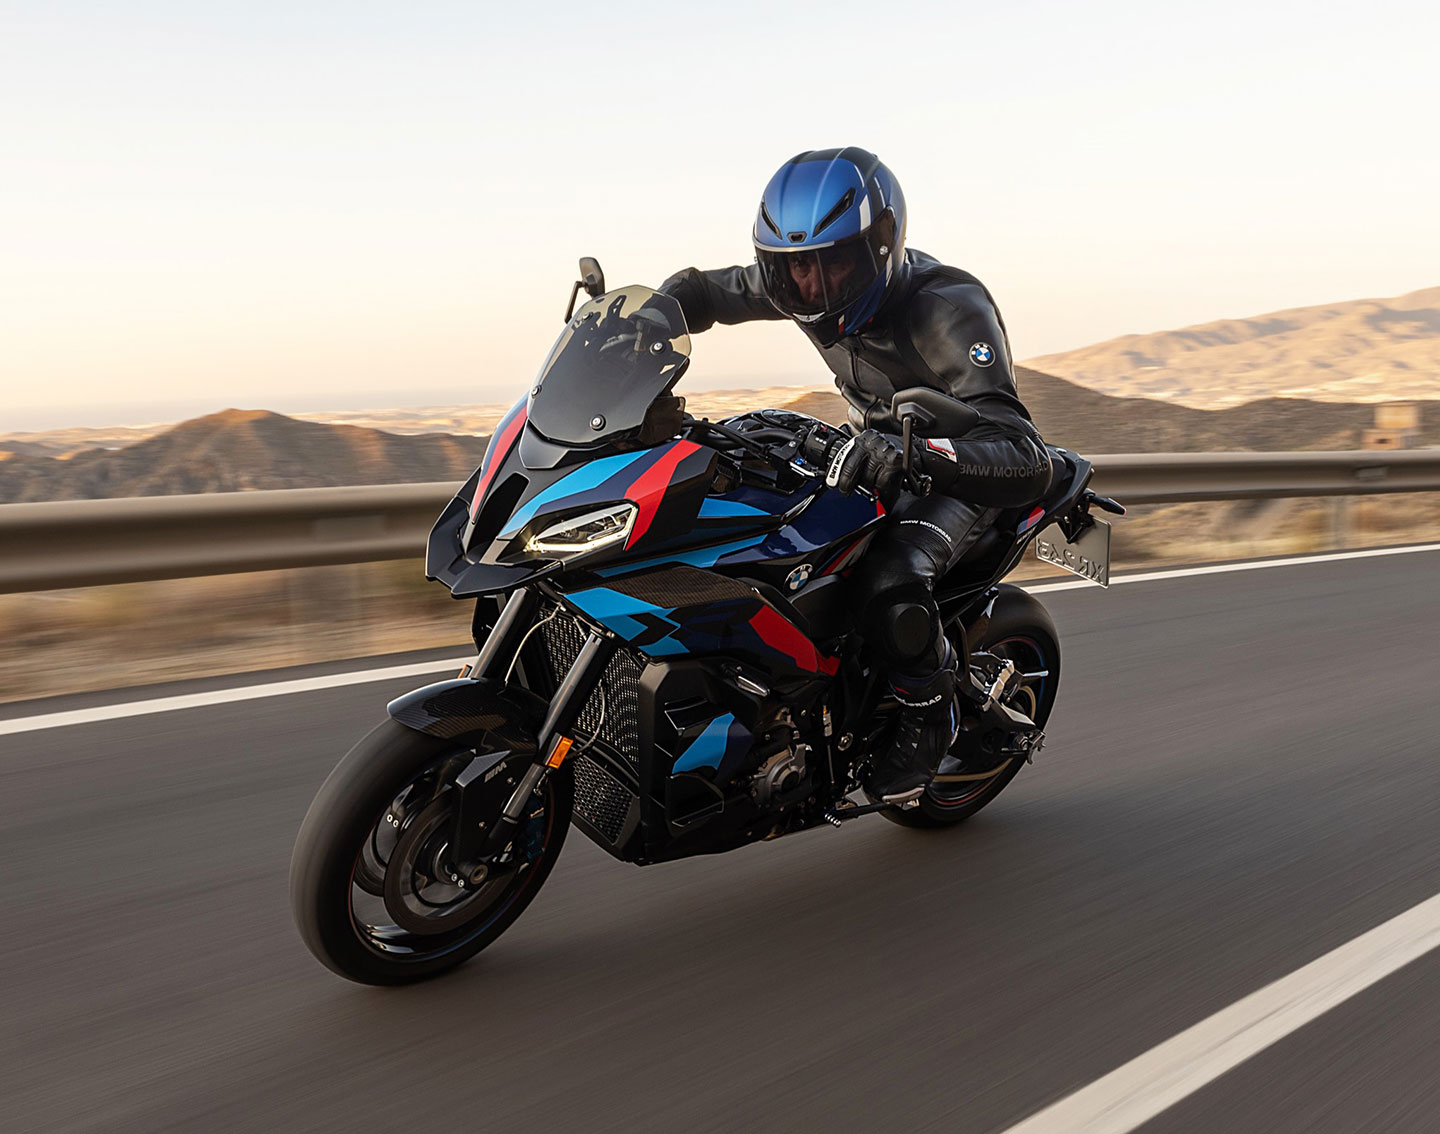 BMW Motorrad Unveils The M 1000 XR As The World's Most Powerful Cross-Over  Motorcycle